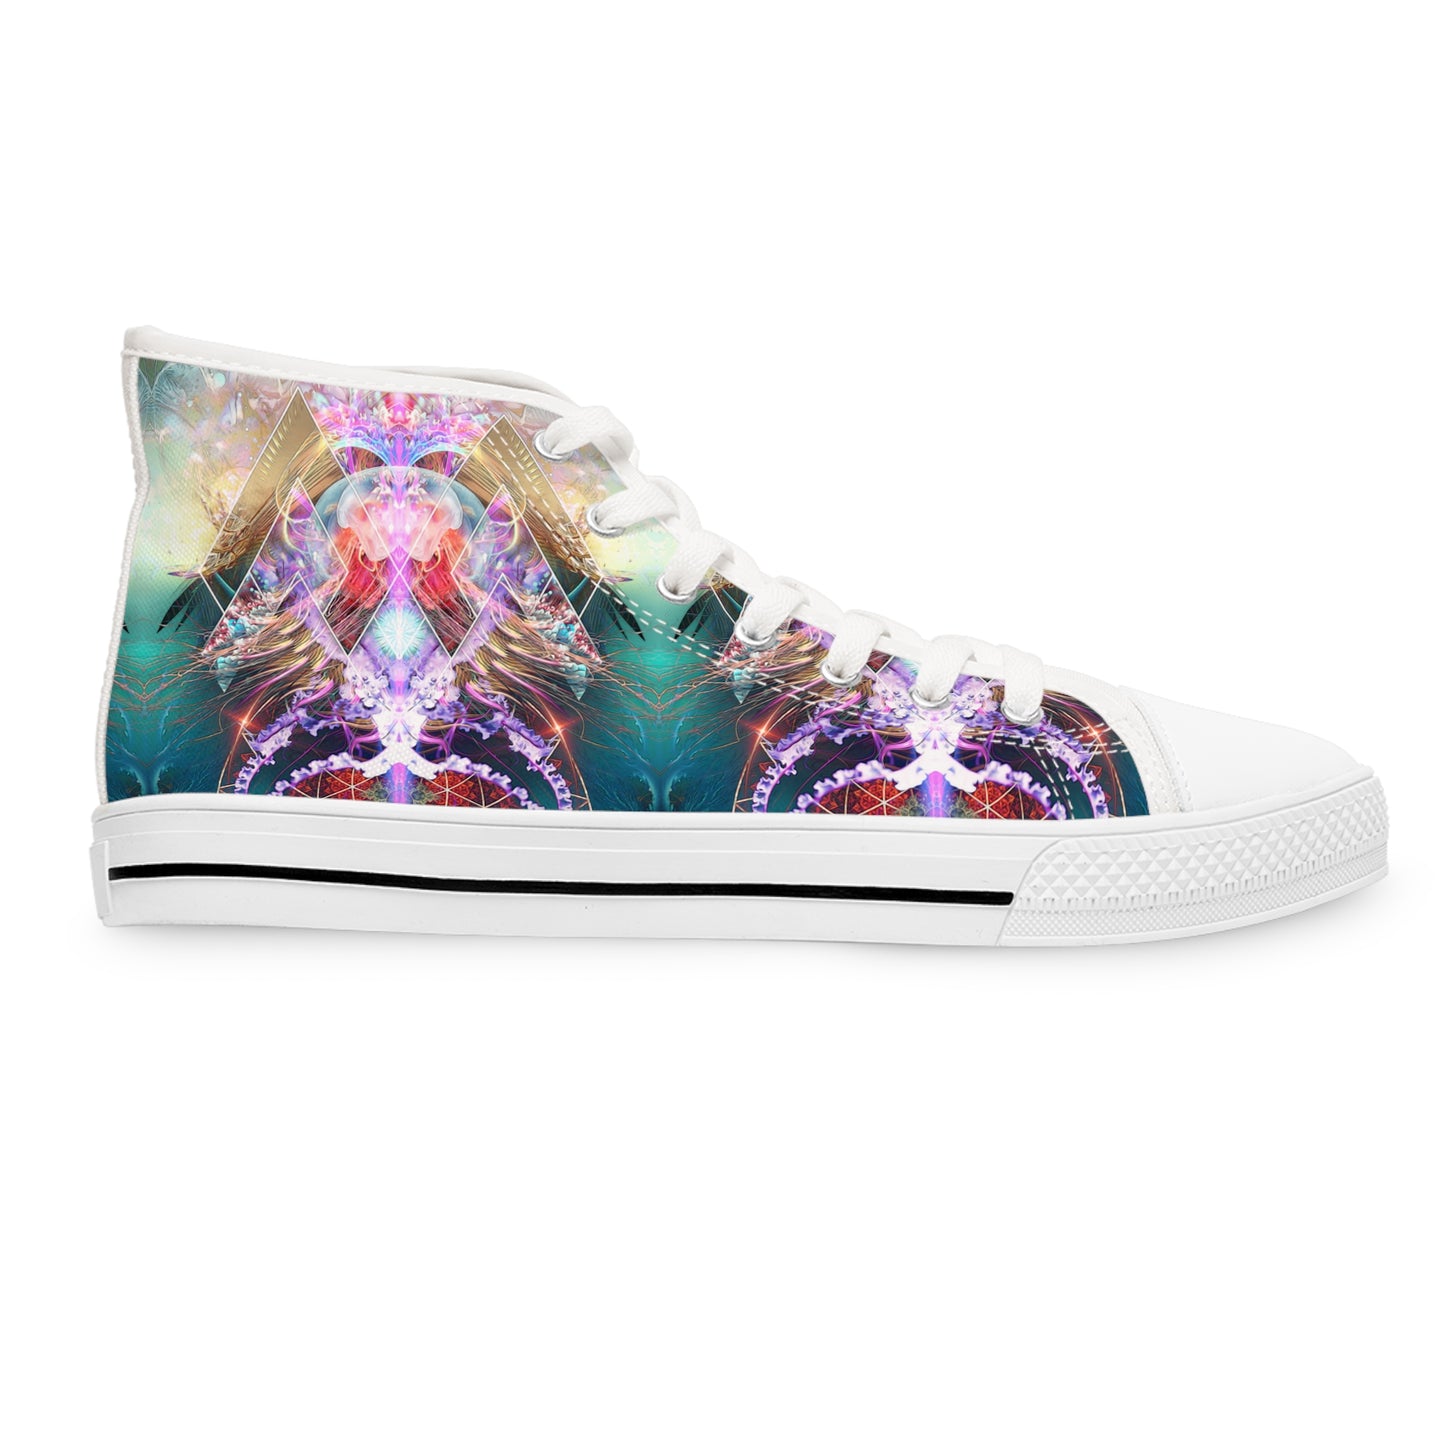 "Primordial Soup V2" WOMEN'S HIGHT TOP SNEAKERS